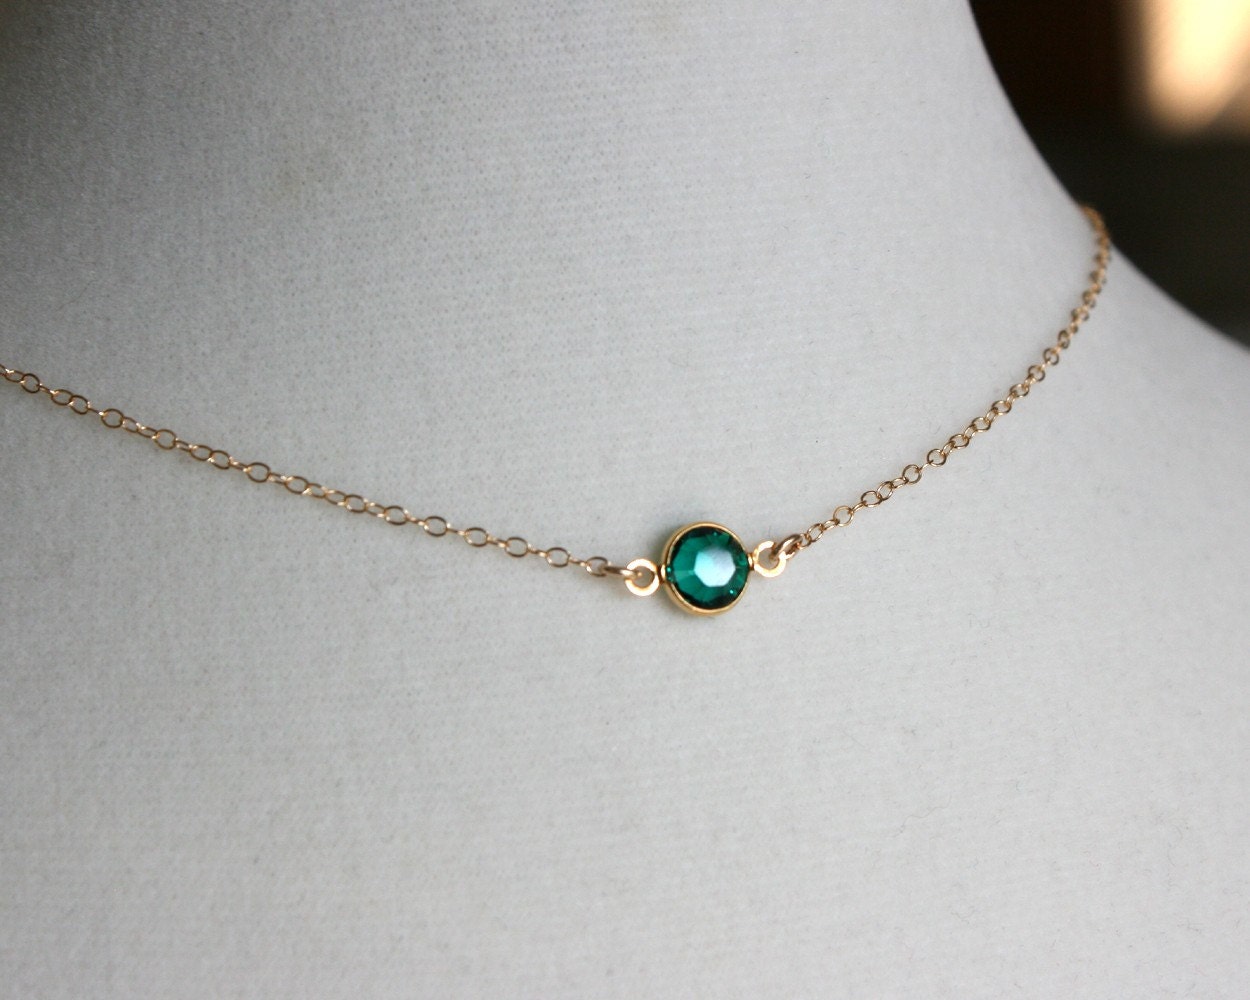 Emerald green crystal necklace gold filled chain small